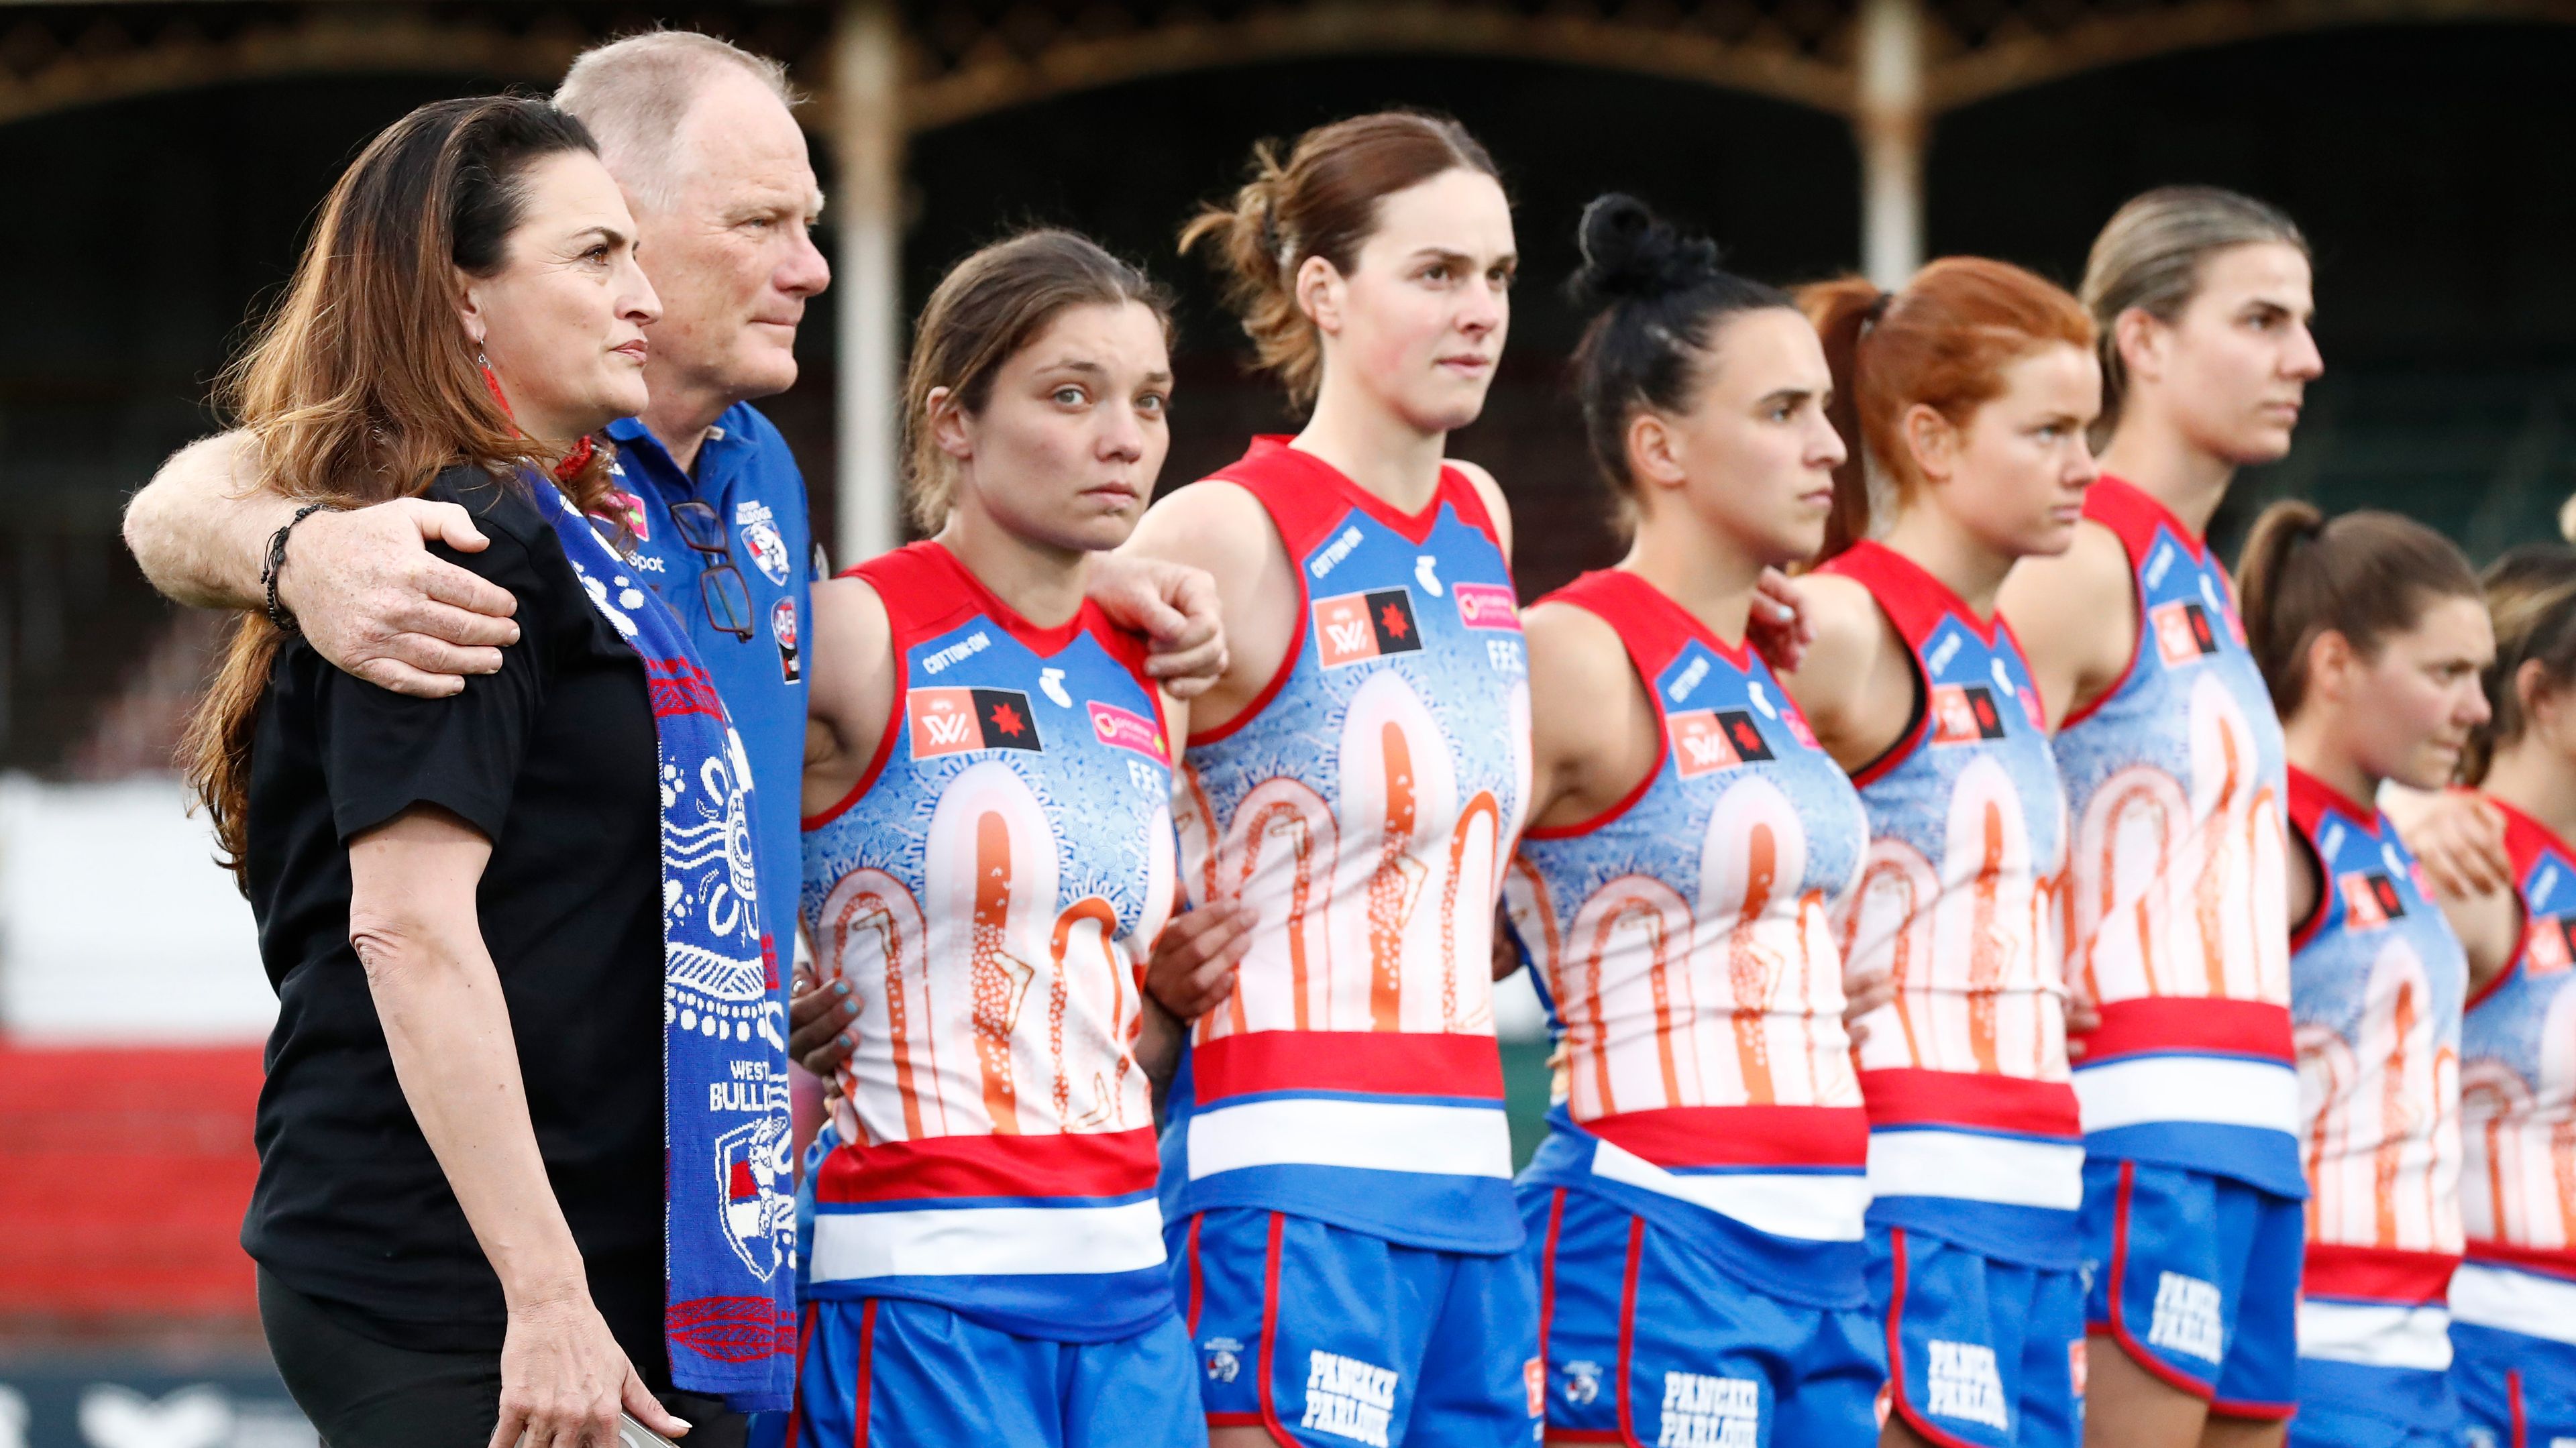 Western Bulldogs players line up before the round three AFLW match between the Western Bulldogs and the Fremantle Dockers at Ikon Park on September 09, 2022 in Melbourne, Australia. (Photo by Darrian Traynor/Getty Images)